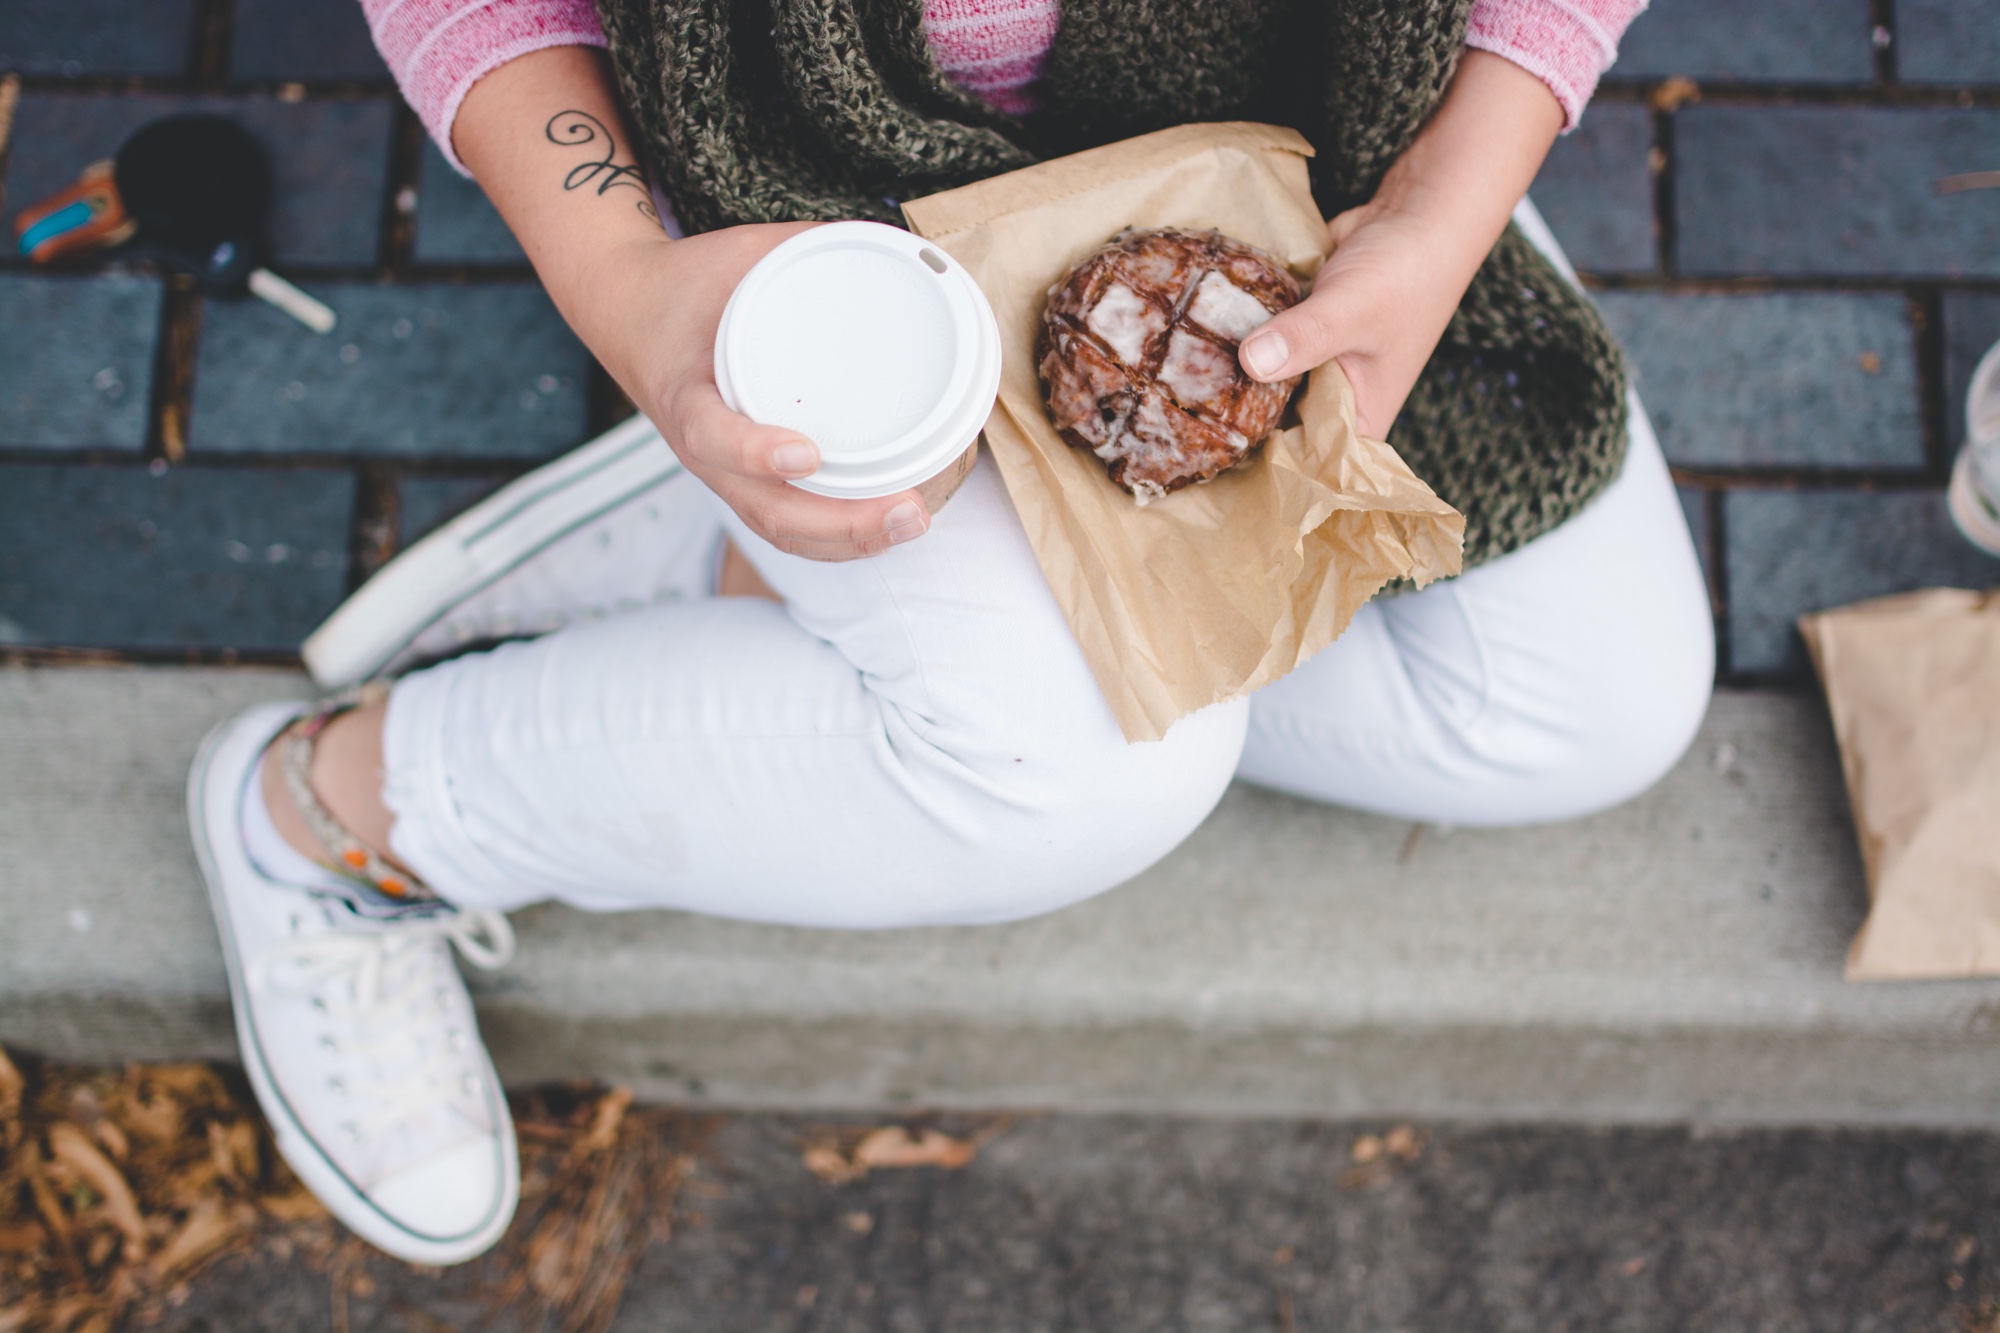 Donut worry! Sharing strategies to boost student attendance for mental health initiatives